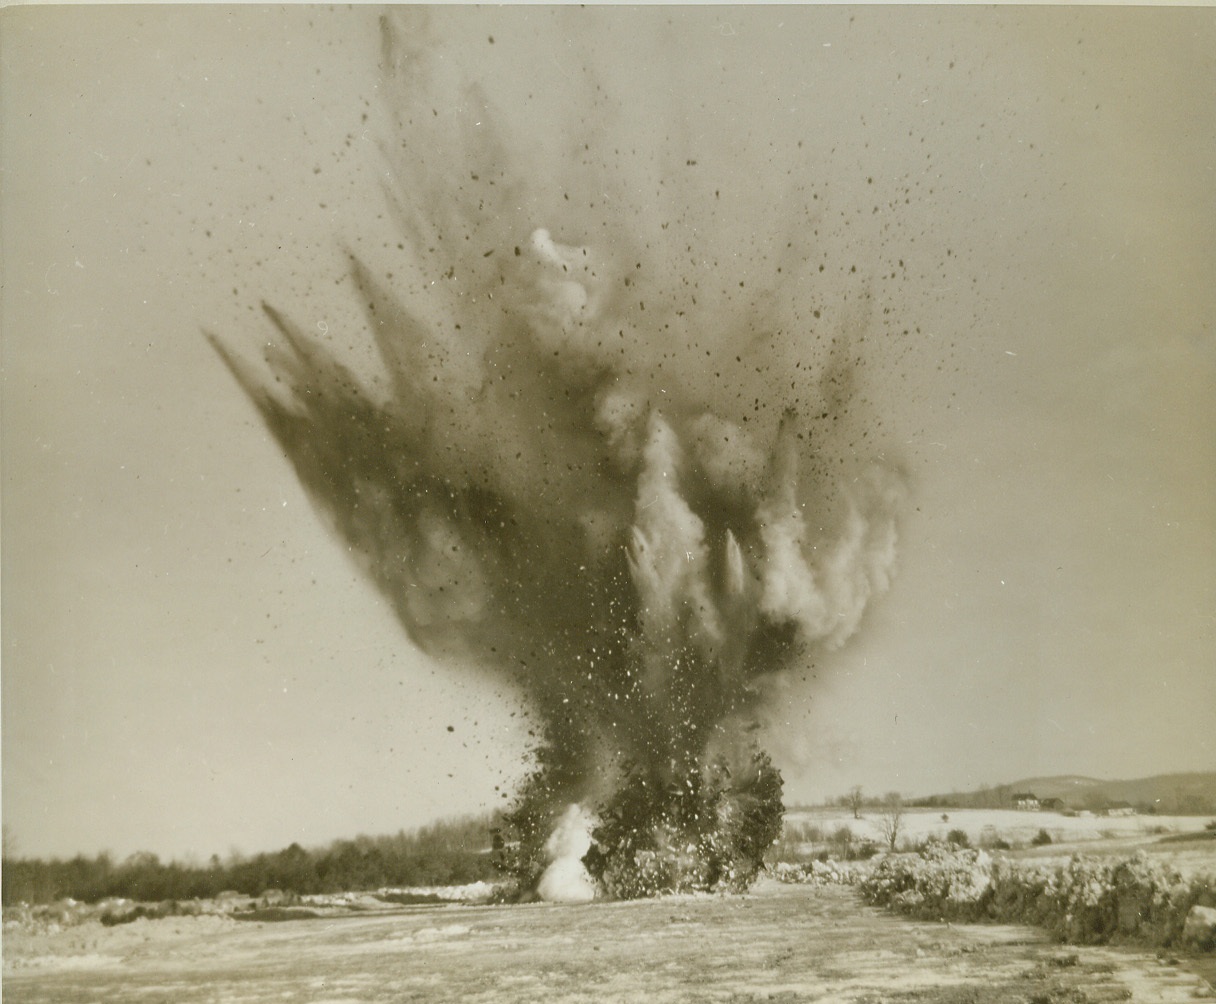 “Bomb” Damages Runway, 3/3/1943. WESTOVER FIELD, MASS. – For the benefit of air borne engineers training at Westover Field, a bomb explosion is simulated on a stabilized earth runway. When the “bombing” is reported, the engineers immediately load their miniature equipment into planes and set out to repair the damage. Credit: (ACME);